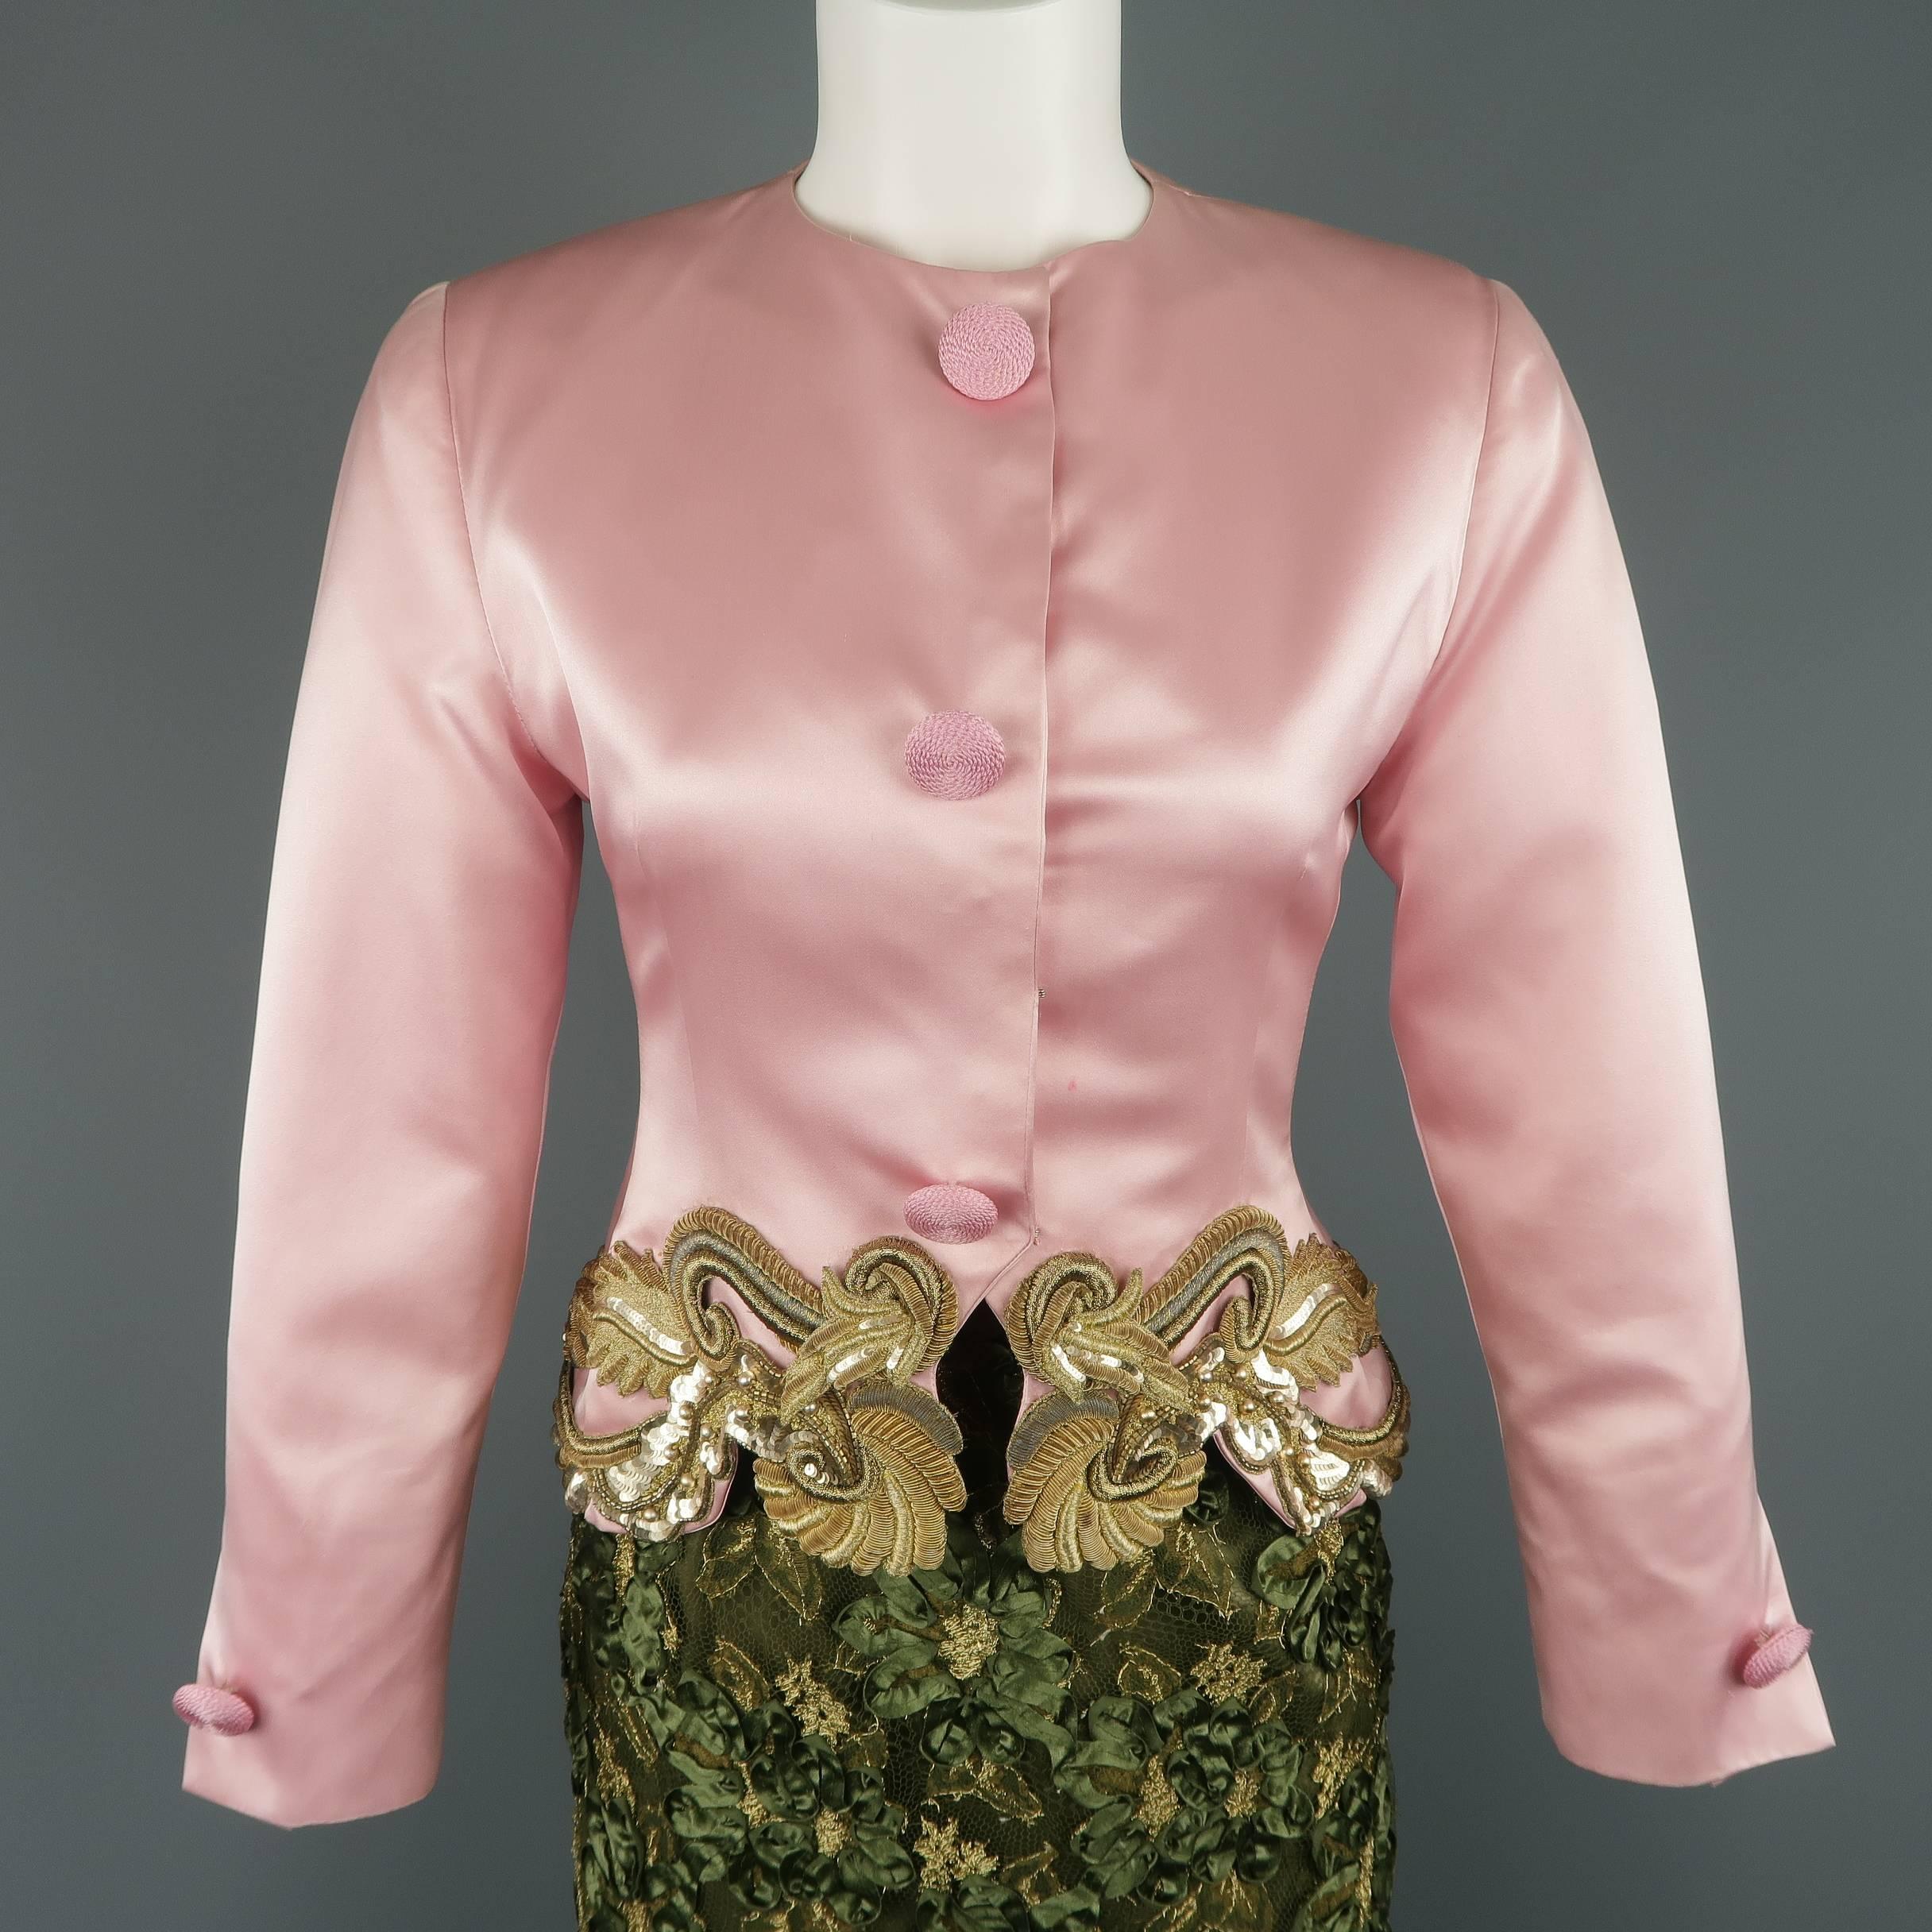 Vintage Bill Blass suit includes A pink silk satin jacket with a round neckline, snap closure front with braided buttons, and gold baroque embellished cutout hemline and a green & gold textured lace skirt. Spot on jacket. As-is. Made in USA.
 
Fair